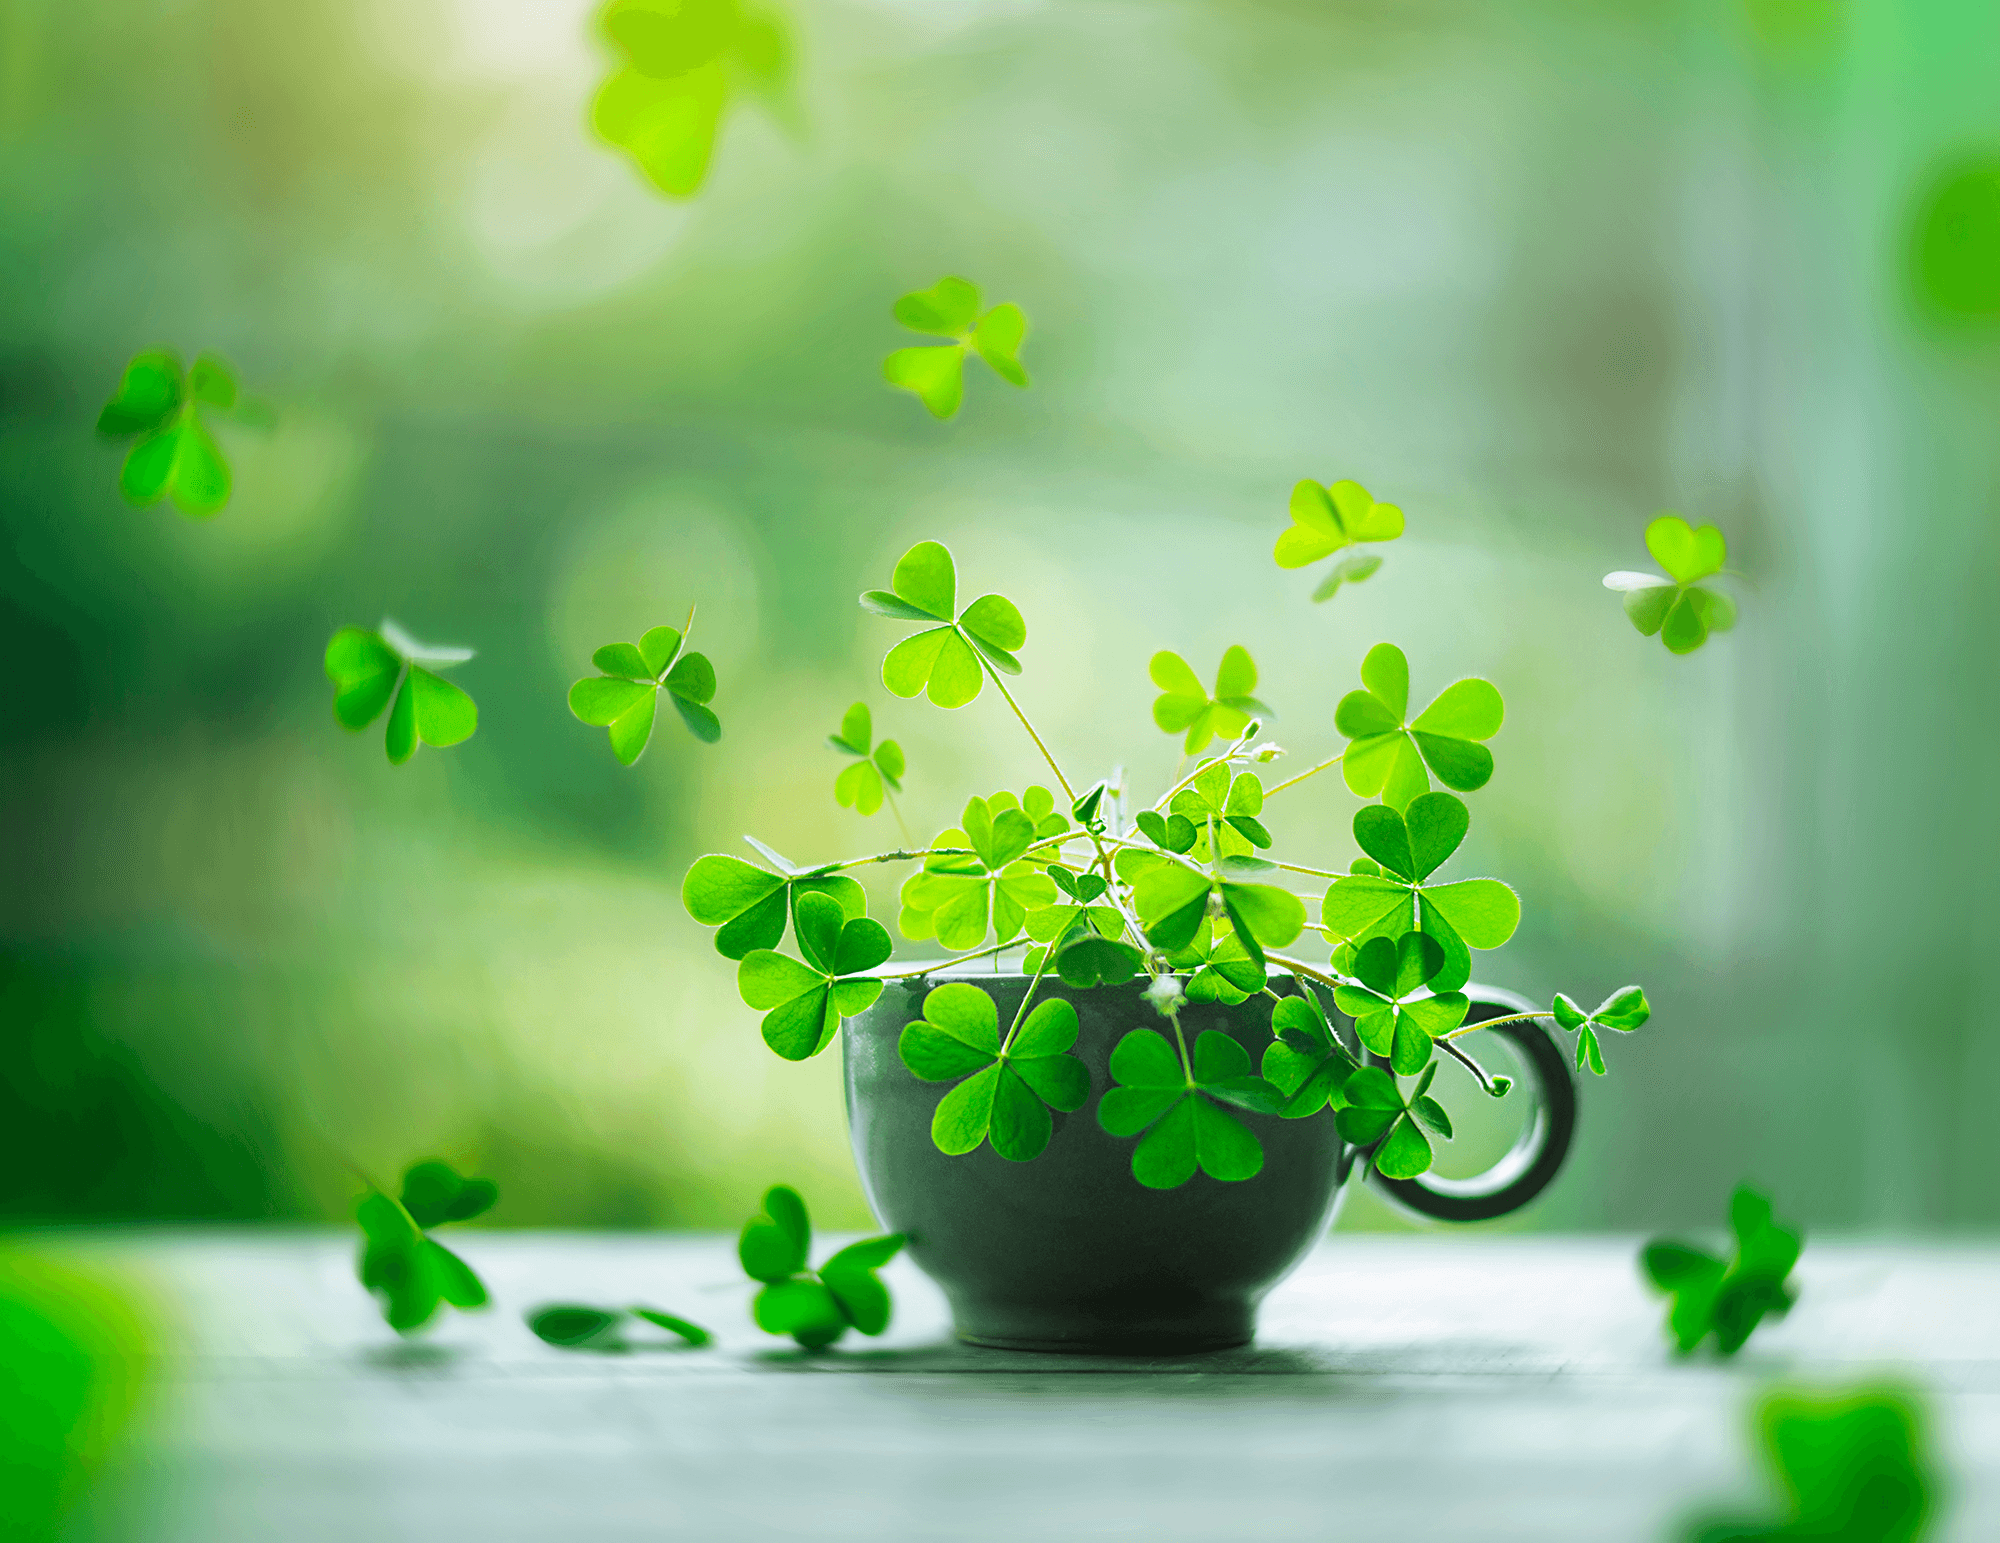 #167 - The Cup of Luck